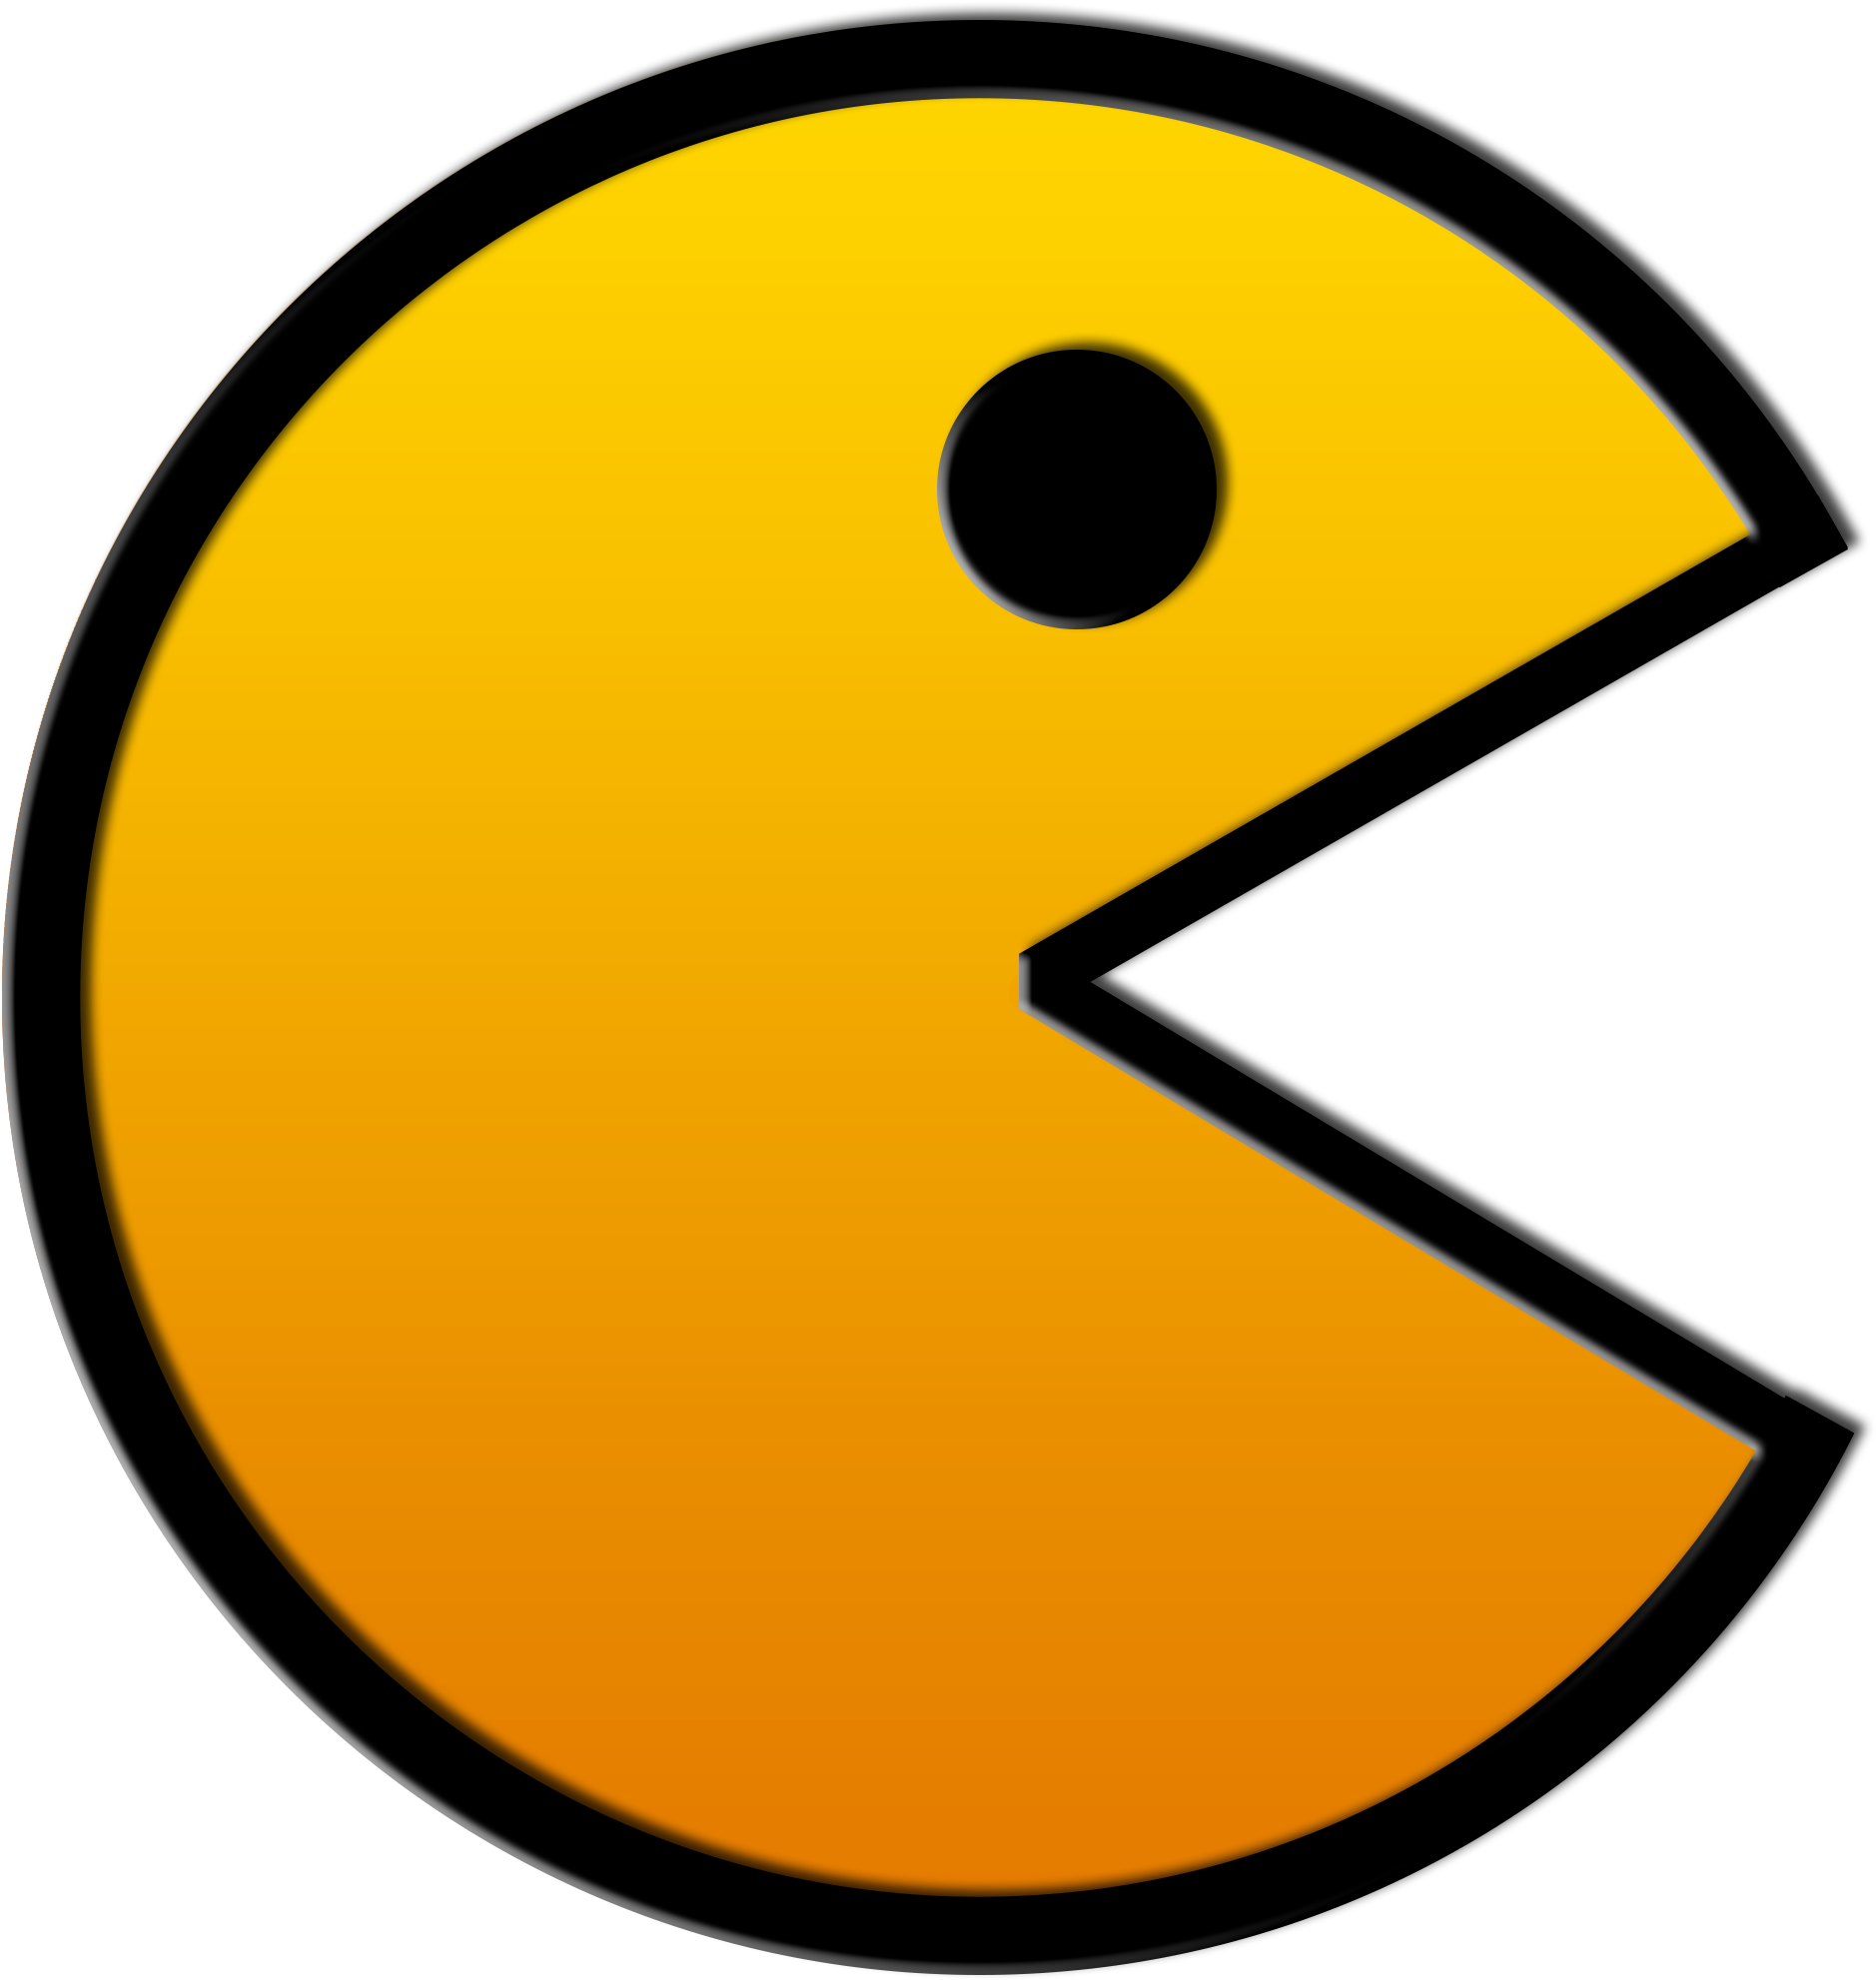 Retro Pacman - Pac Man With No Background (2000x2000)